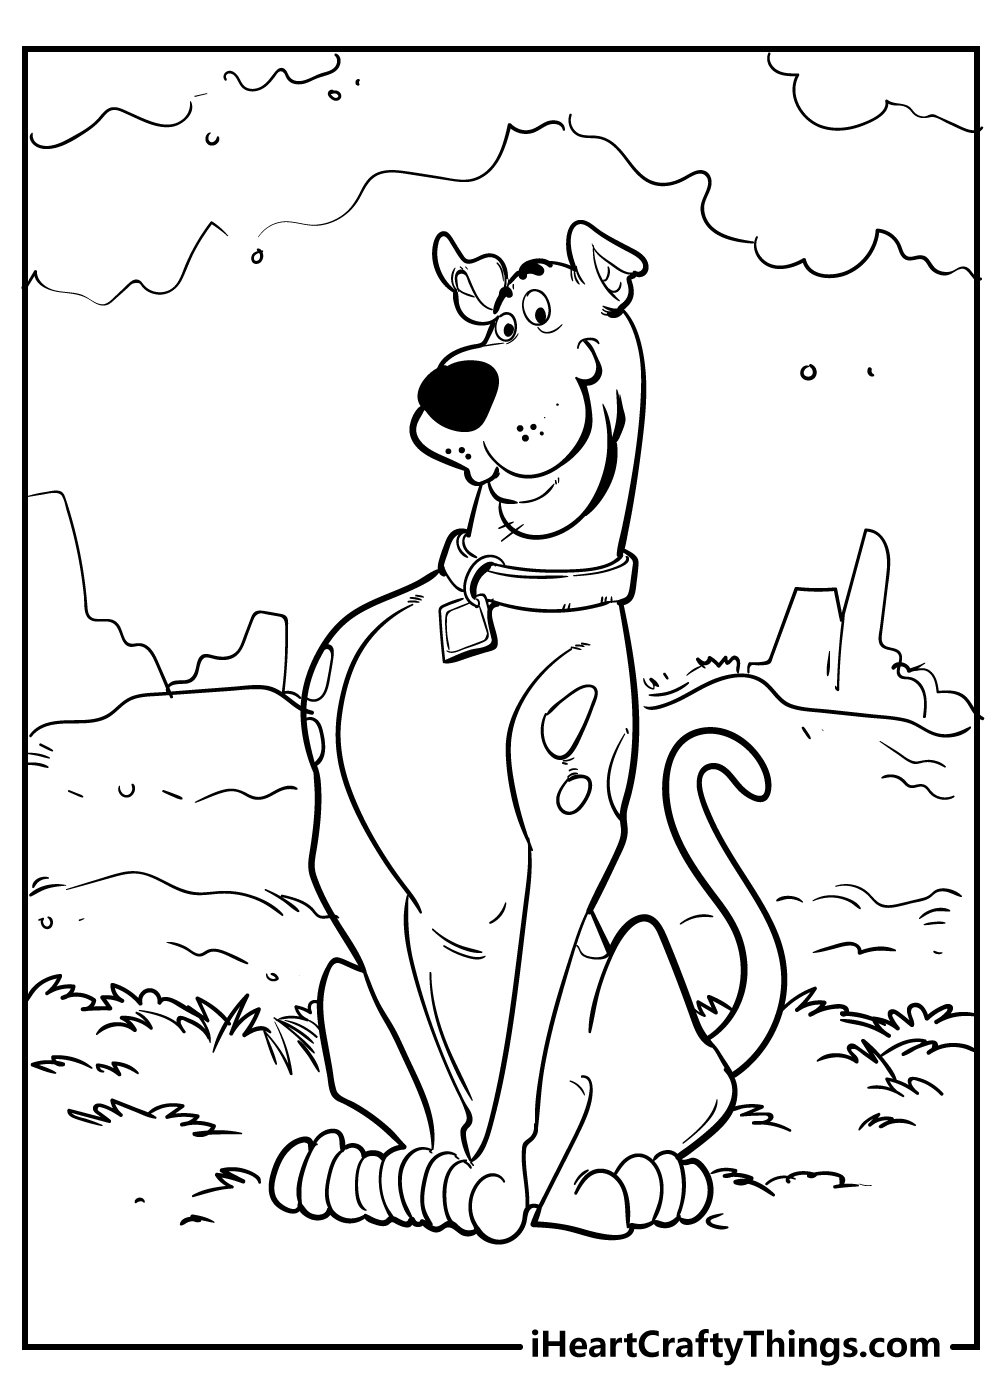 Scooby Doo Coloring Pages Updated 20